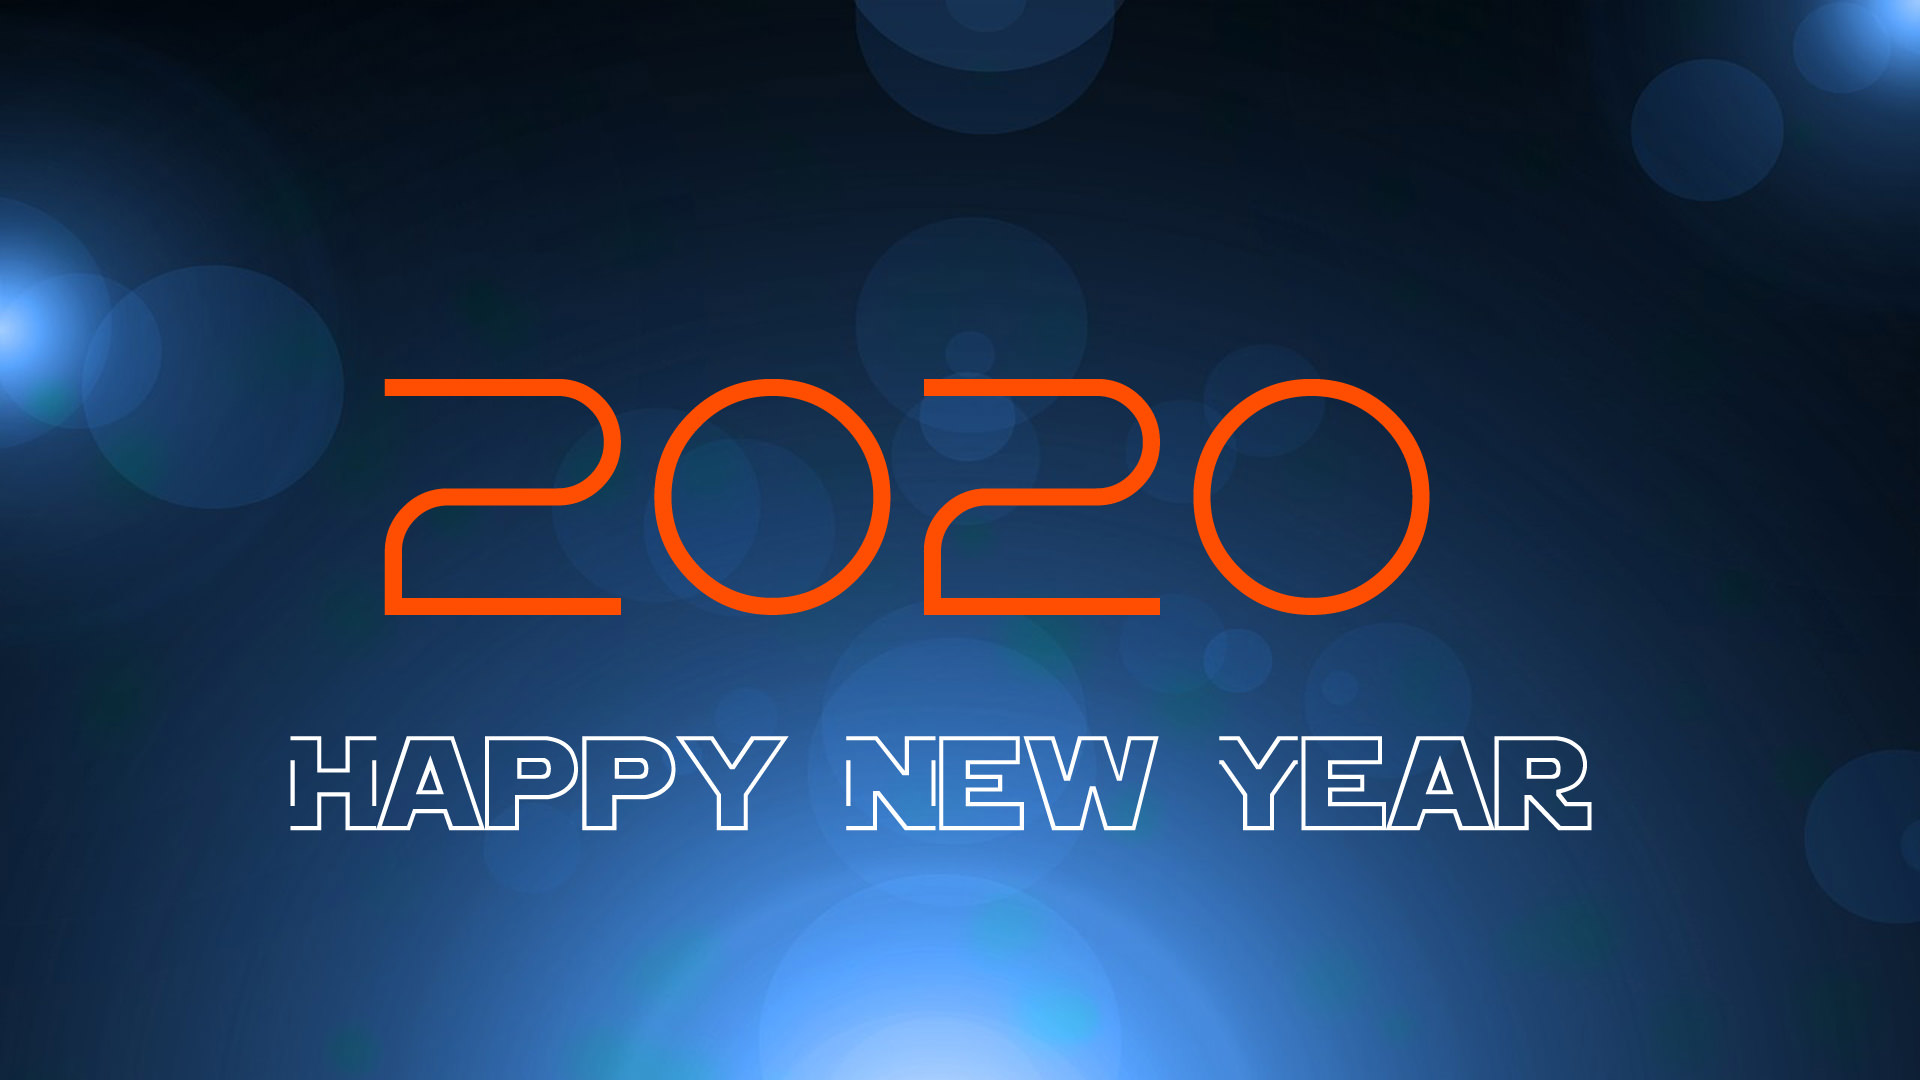 2020 Happy New Year Images for Desktop